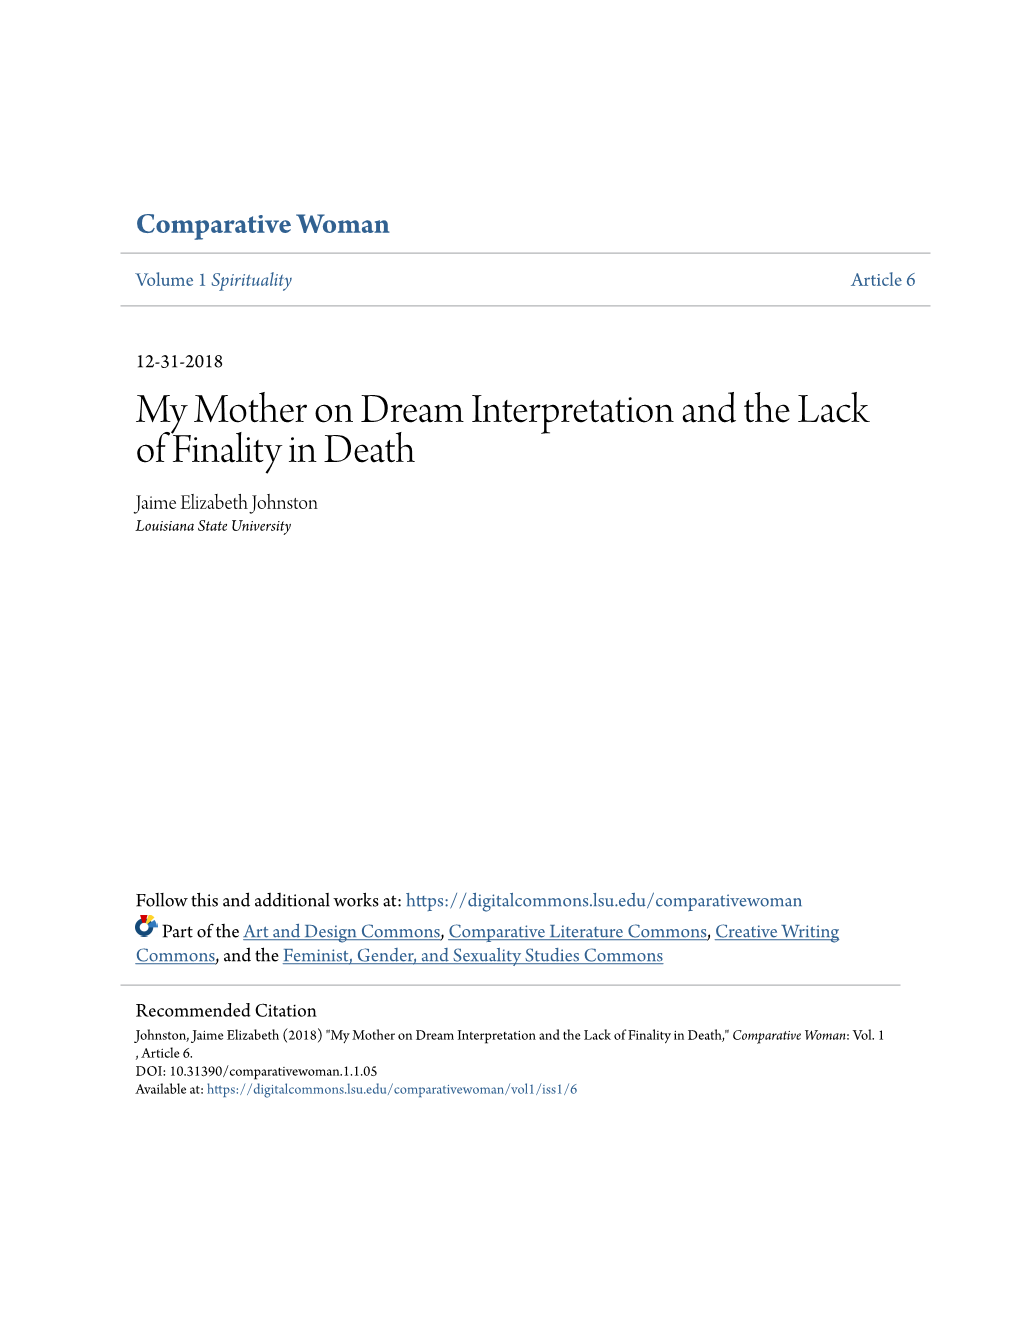 My Mother on Dream Interpretation and the Lack of Finality in Death Jaime Elizabeth Johnston Louisiana State University